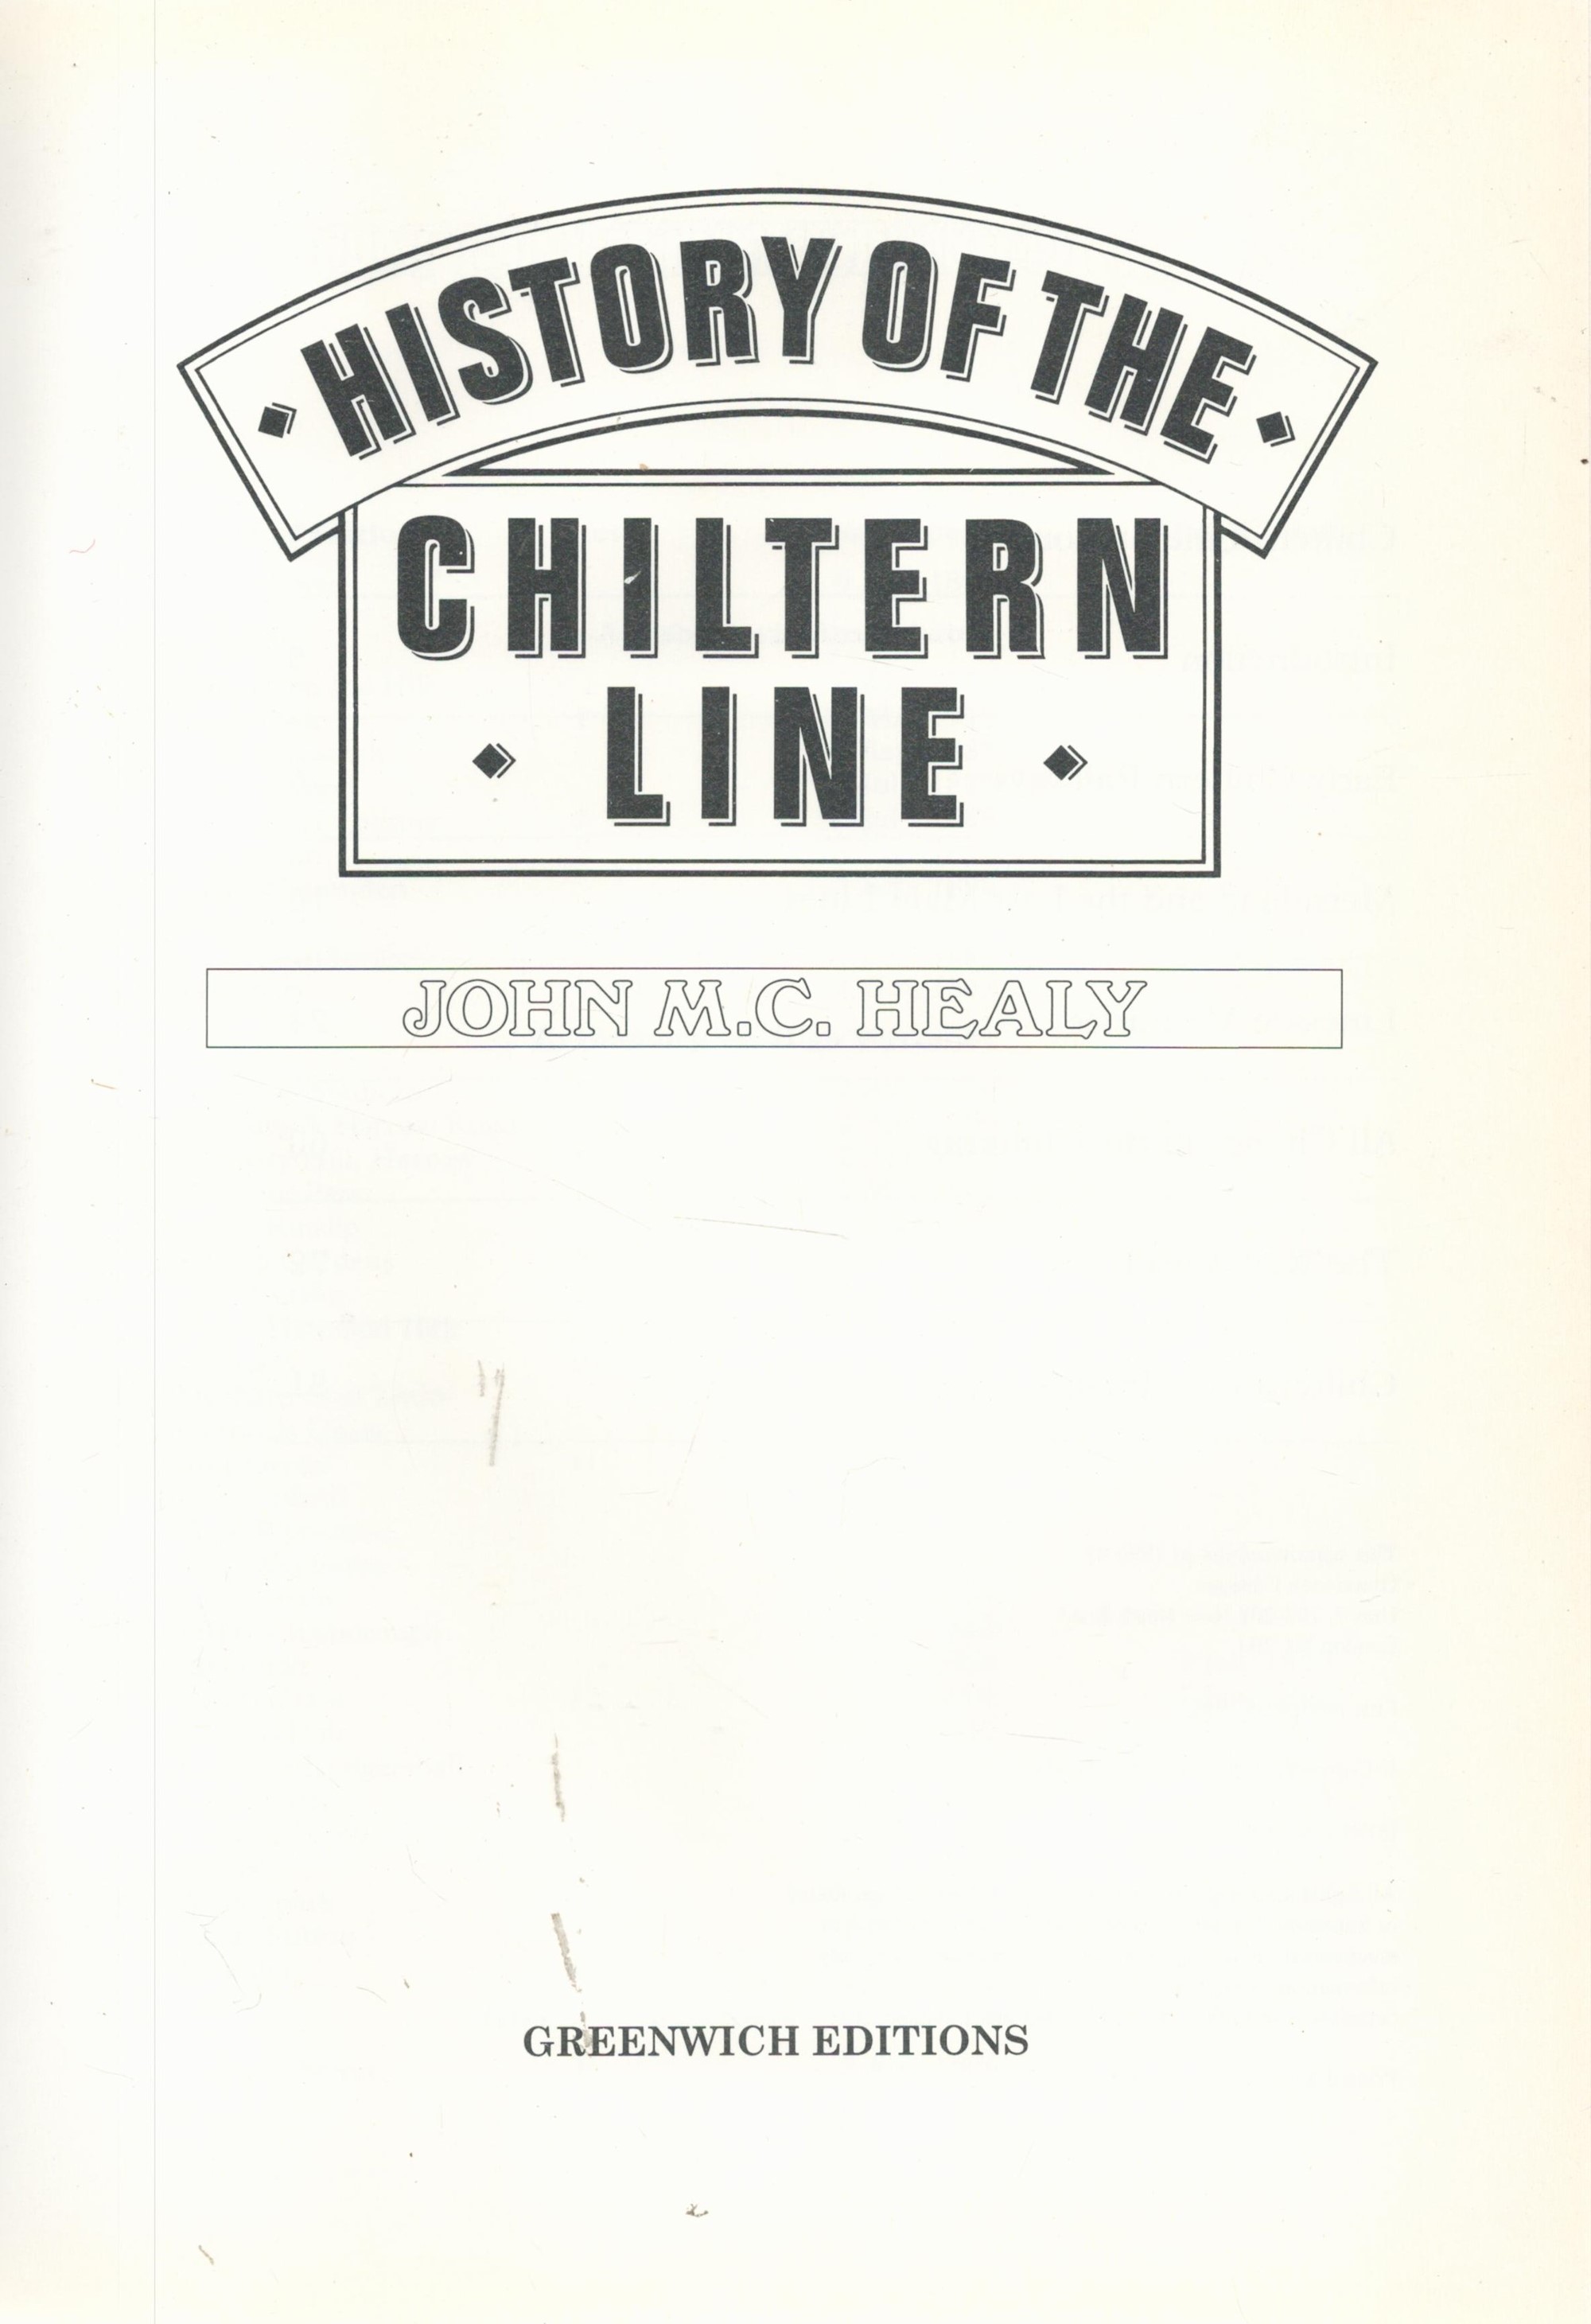 History of The Chiltern Line by John M C Healy 1996 edition unknown Hardback Book published by - Image 2 of 3